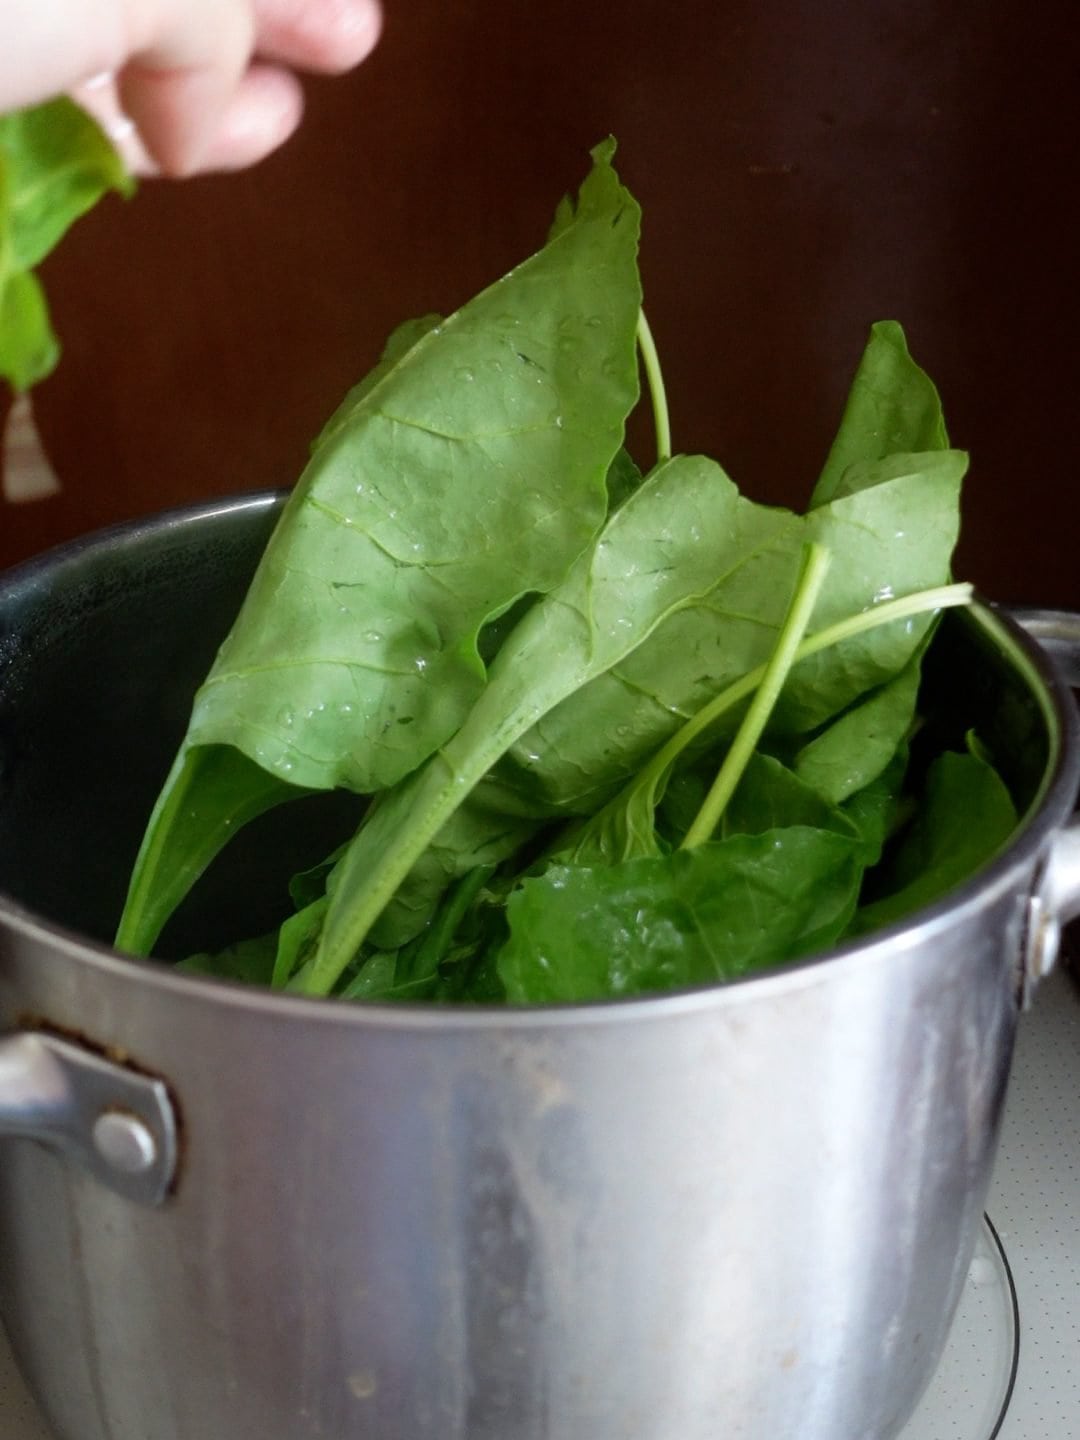 Blanch the spinach in boiling water